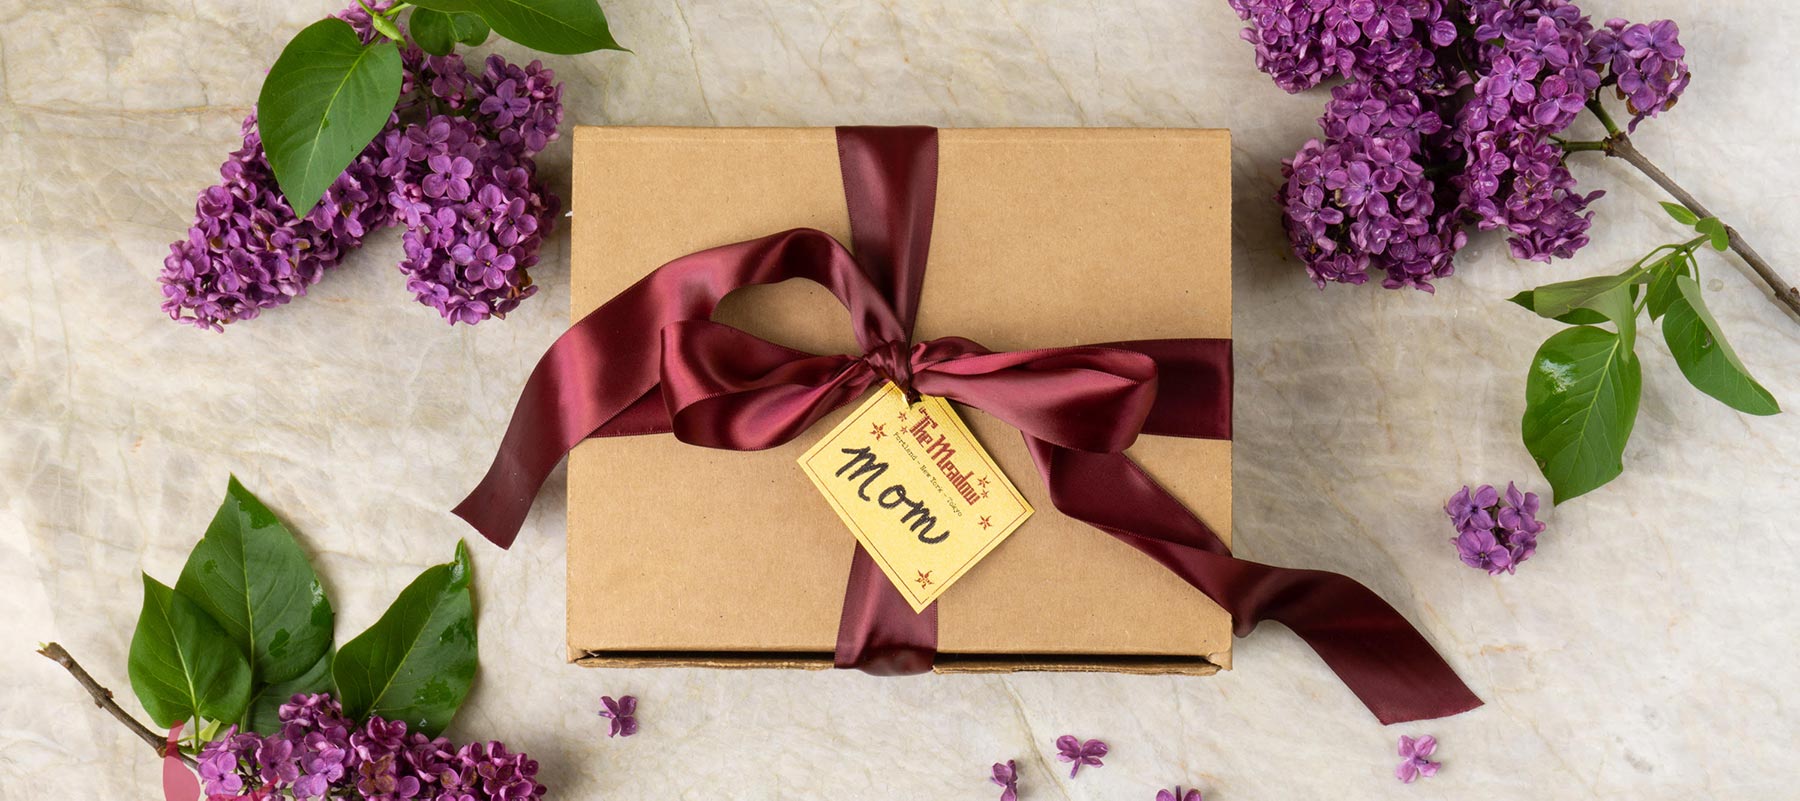 example spring gift box surrounded by lilacs